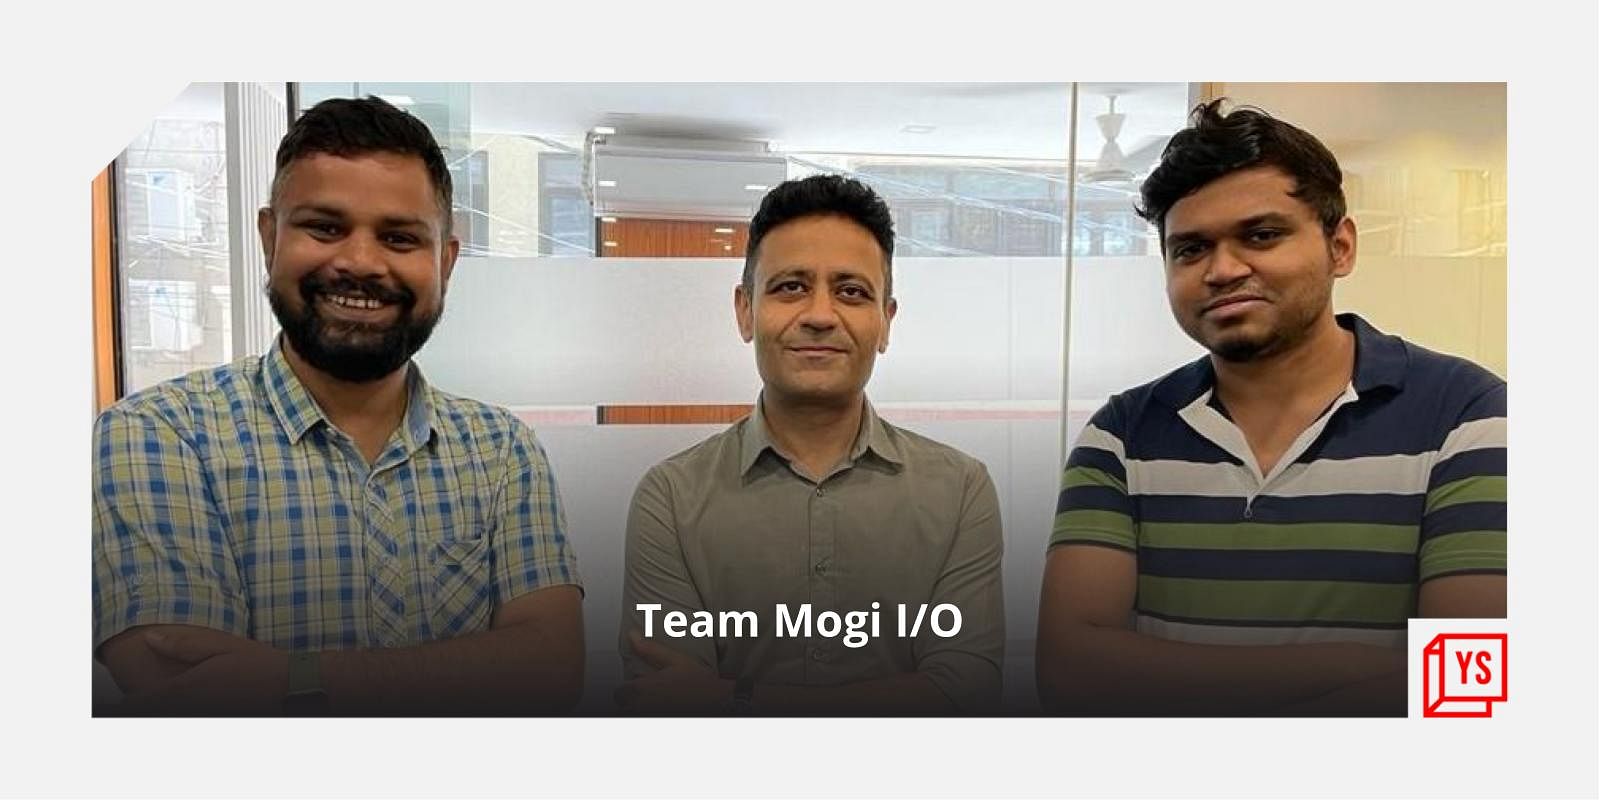 You are currently viewing [Tech50] From Yoga teacher to film makers, video tech startup Mogi I/O aims to help users launch their own OTT app in 24 hours